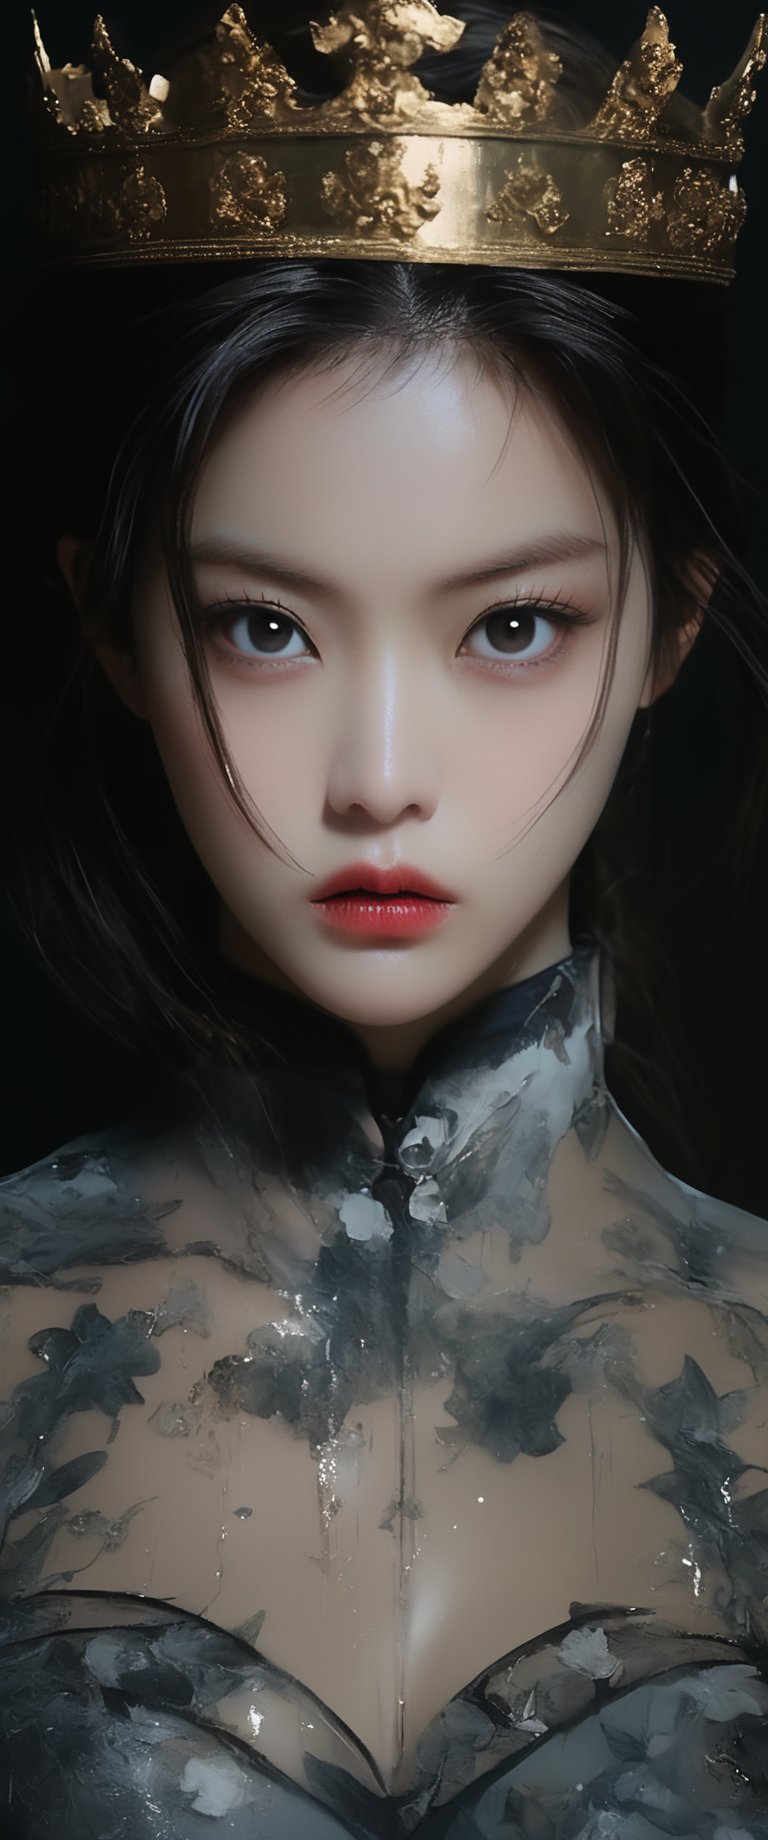 breathtaking ethereal RAW photo of female ((poster of a sexy [princess, suffering, burdened by the weight of a crown, ] in a [ ], pissed_off,angry, latex uniform, eye angle view, ,dark anim,minsi,goeun, , , )), dark and moody style, perfect face, outstretched perfect hands . masterpiece, professional, award-winning, intricate details, ultra high detailed, 64k, dramatic light, volumetric light, dynamic lighting, Epic, splash art .. ), by james jean $, roby dwi antono $, ross tran $. francis bacon $, michal mraz $, adrian ghenie $, petra cortright $, gerhard richter $, takato yamamoto $, ashley wood, tense atmospheric, , , , sooyaaa,IMGFIX,Comic Book-Style,Movie Aesthetic,action shot,photo r3al,bad quality image,oil painting, cinematic moviemaker style,Japan Vibes,H effect,koh_yunjung ,koh_yunjung,kwon-nara,sooyaaa,colorful,roses_are_rosie,armor,han-hyoju-xl
, ct-nijireal,Movie Still